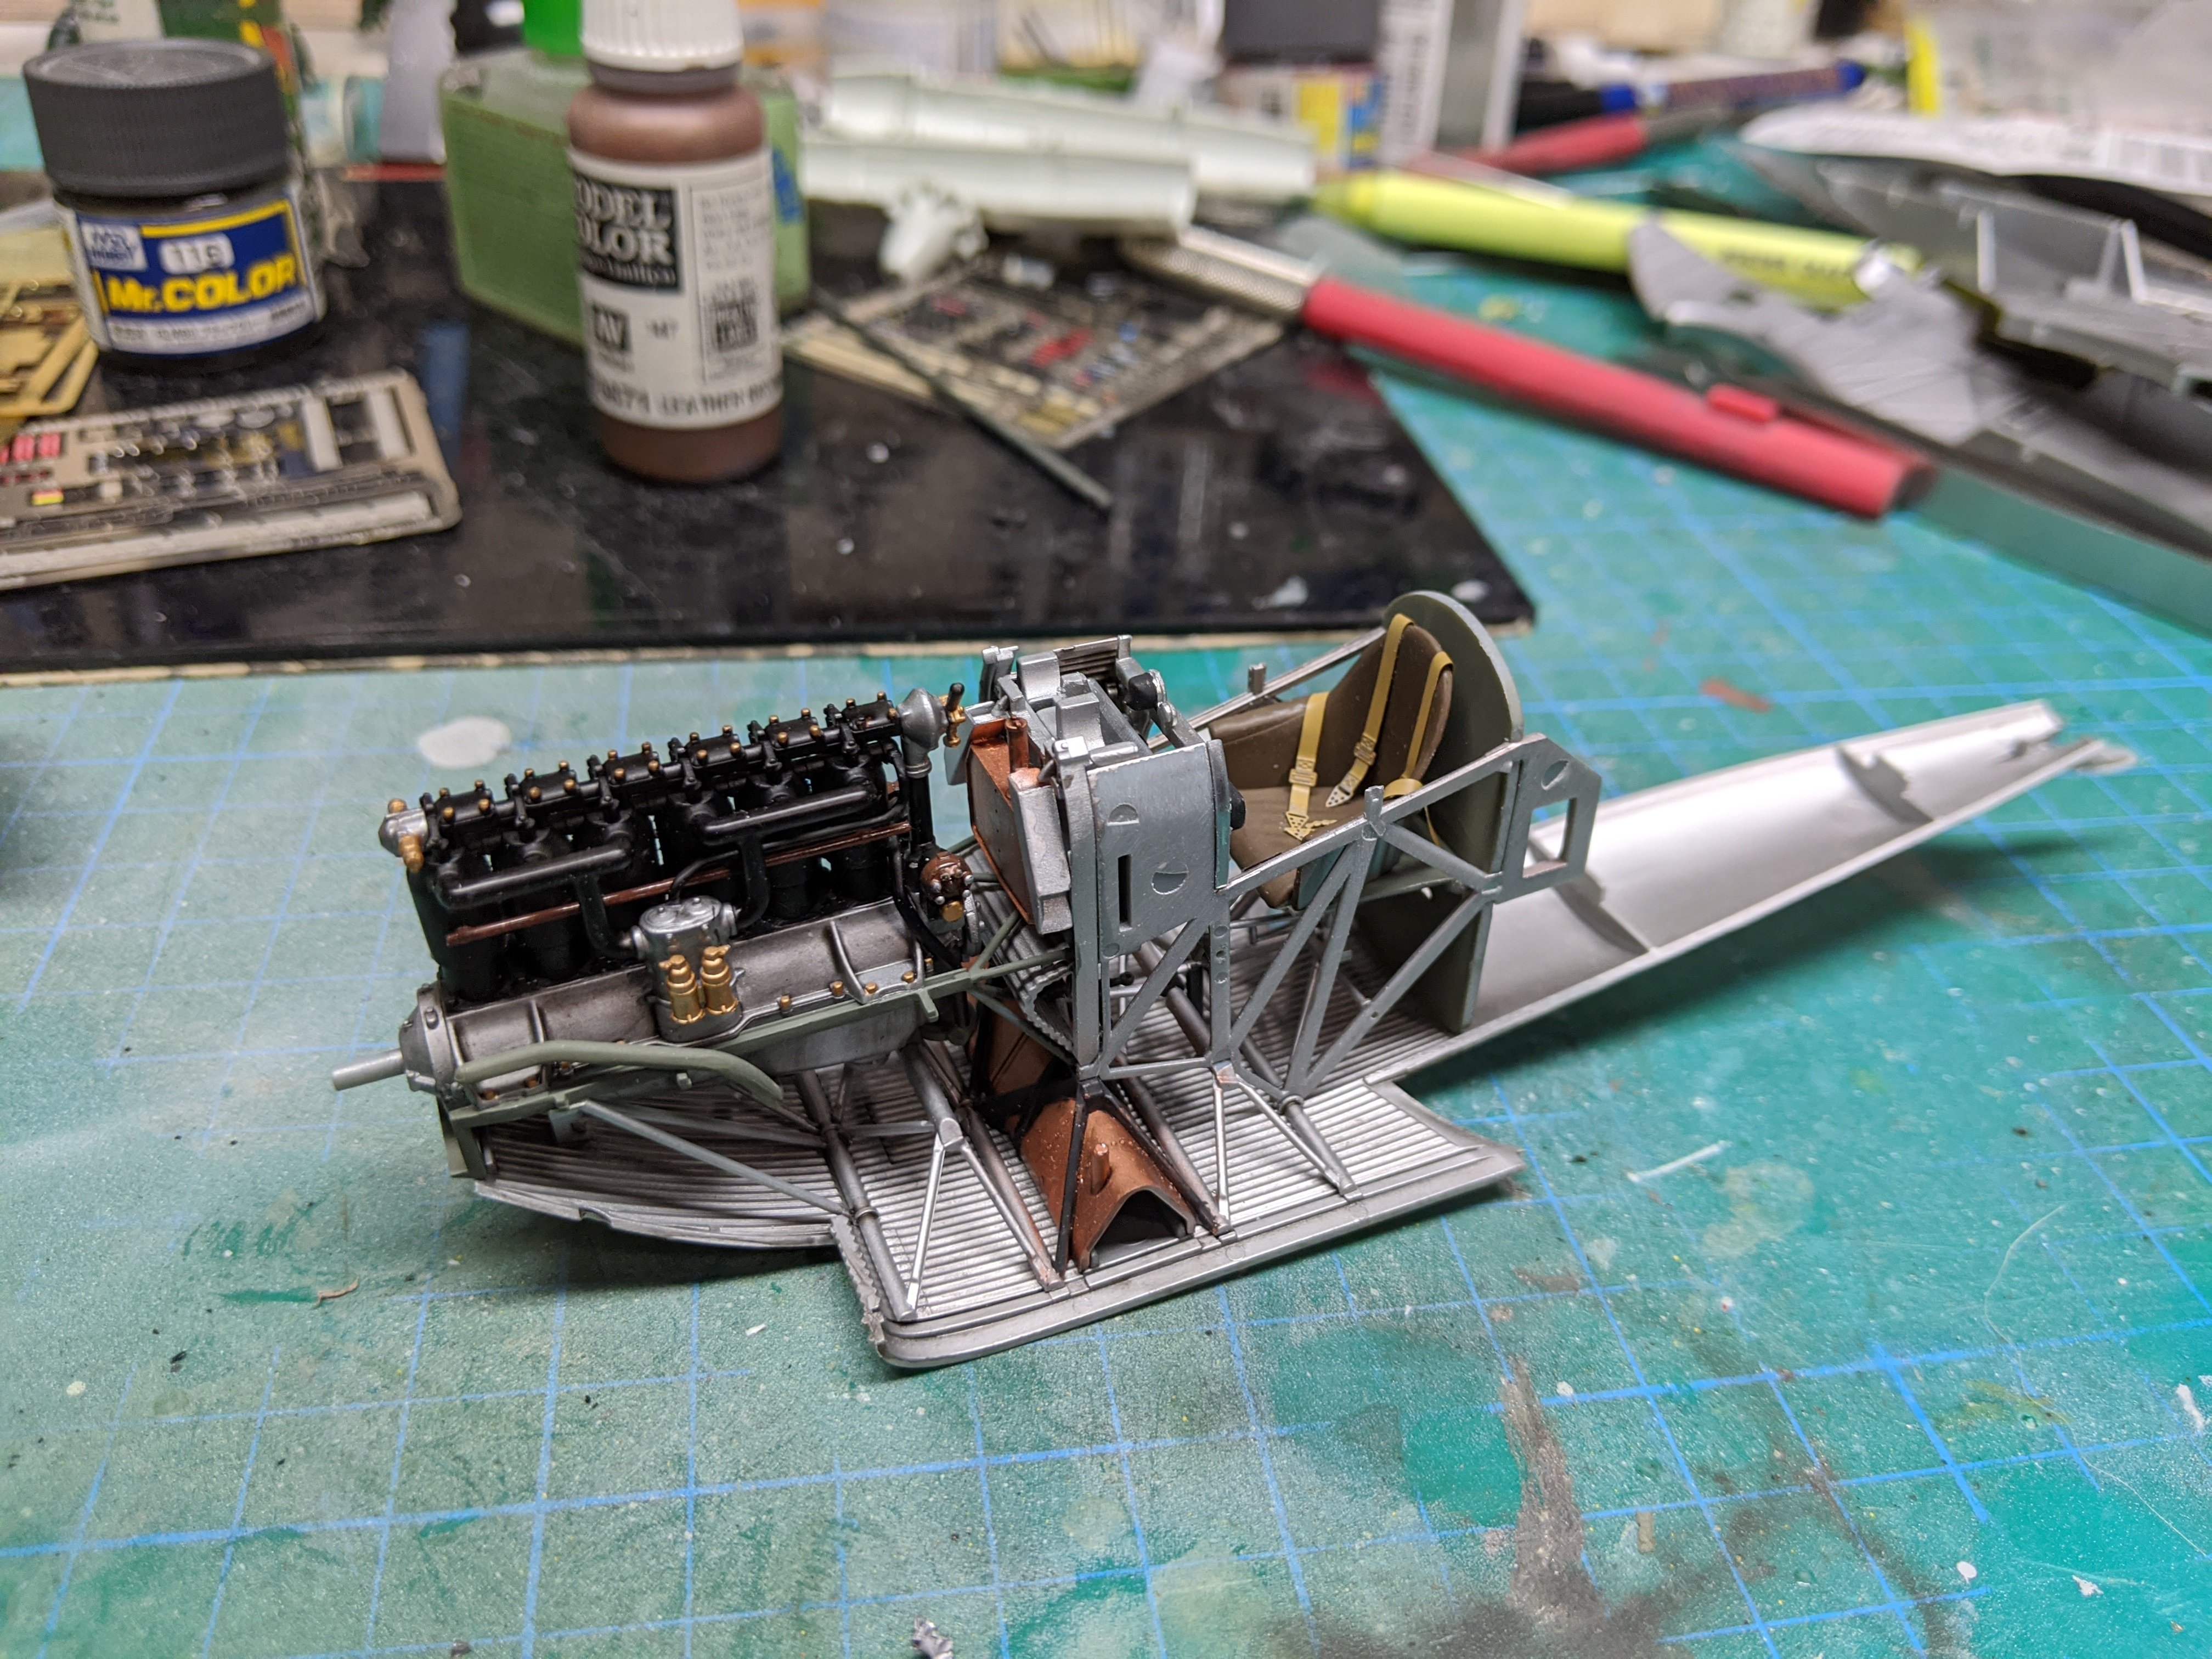 WNW Junkers D.1 - LSM 1/35 and Larger Work In Progress - Large Scale ...